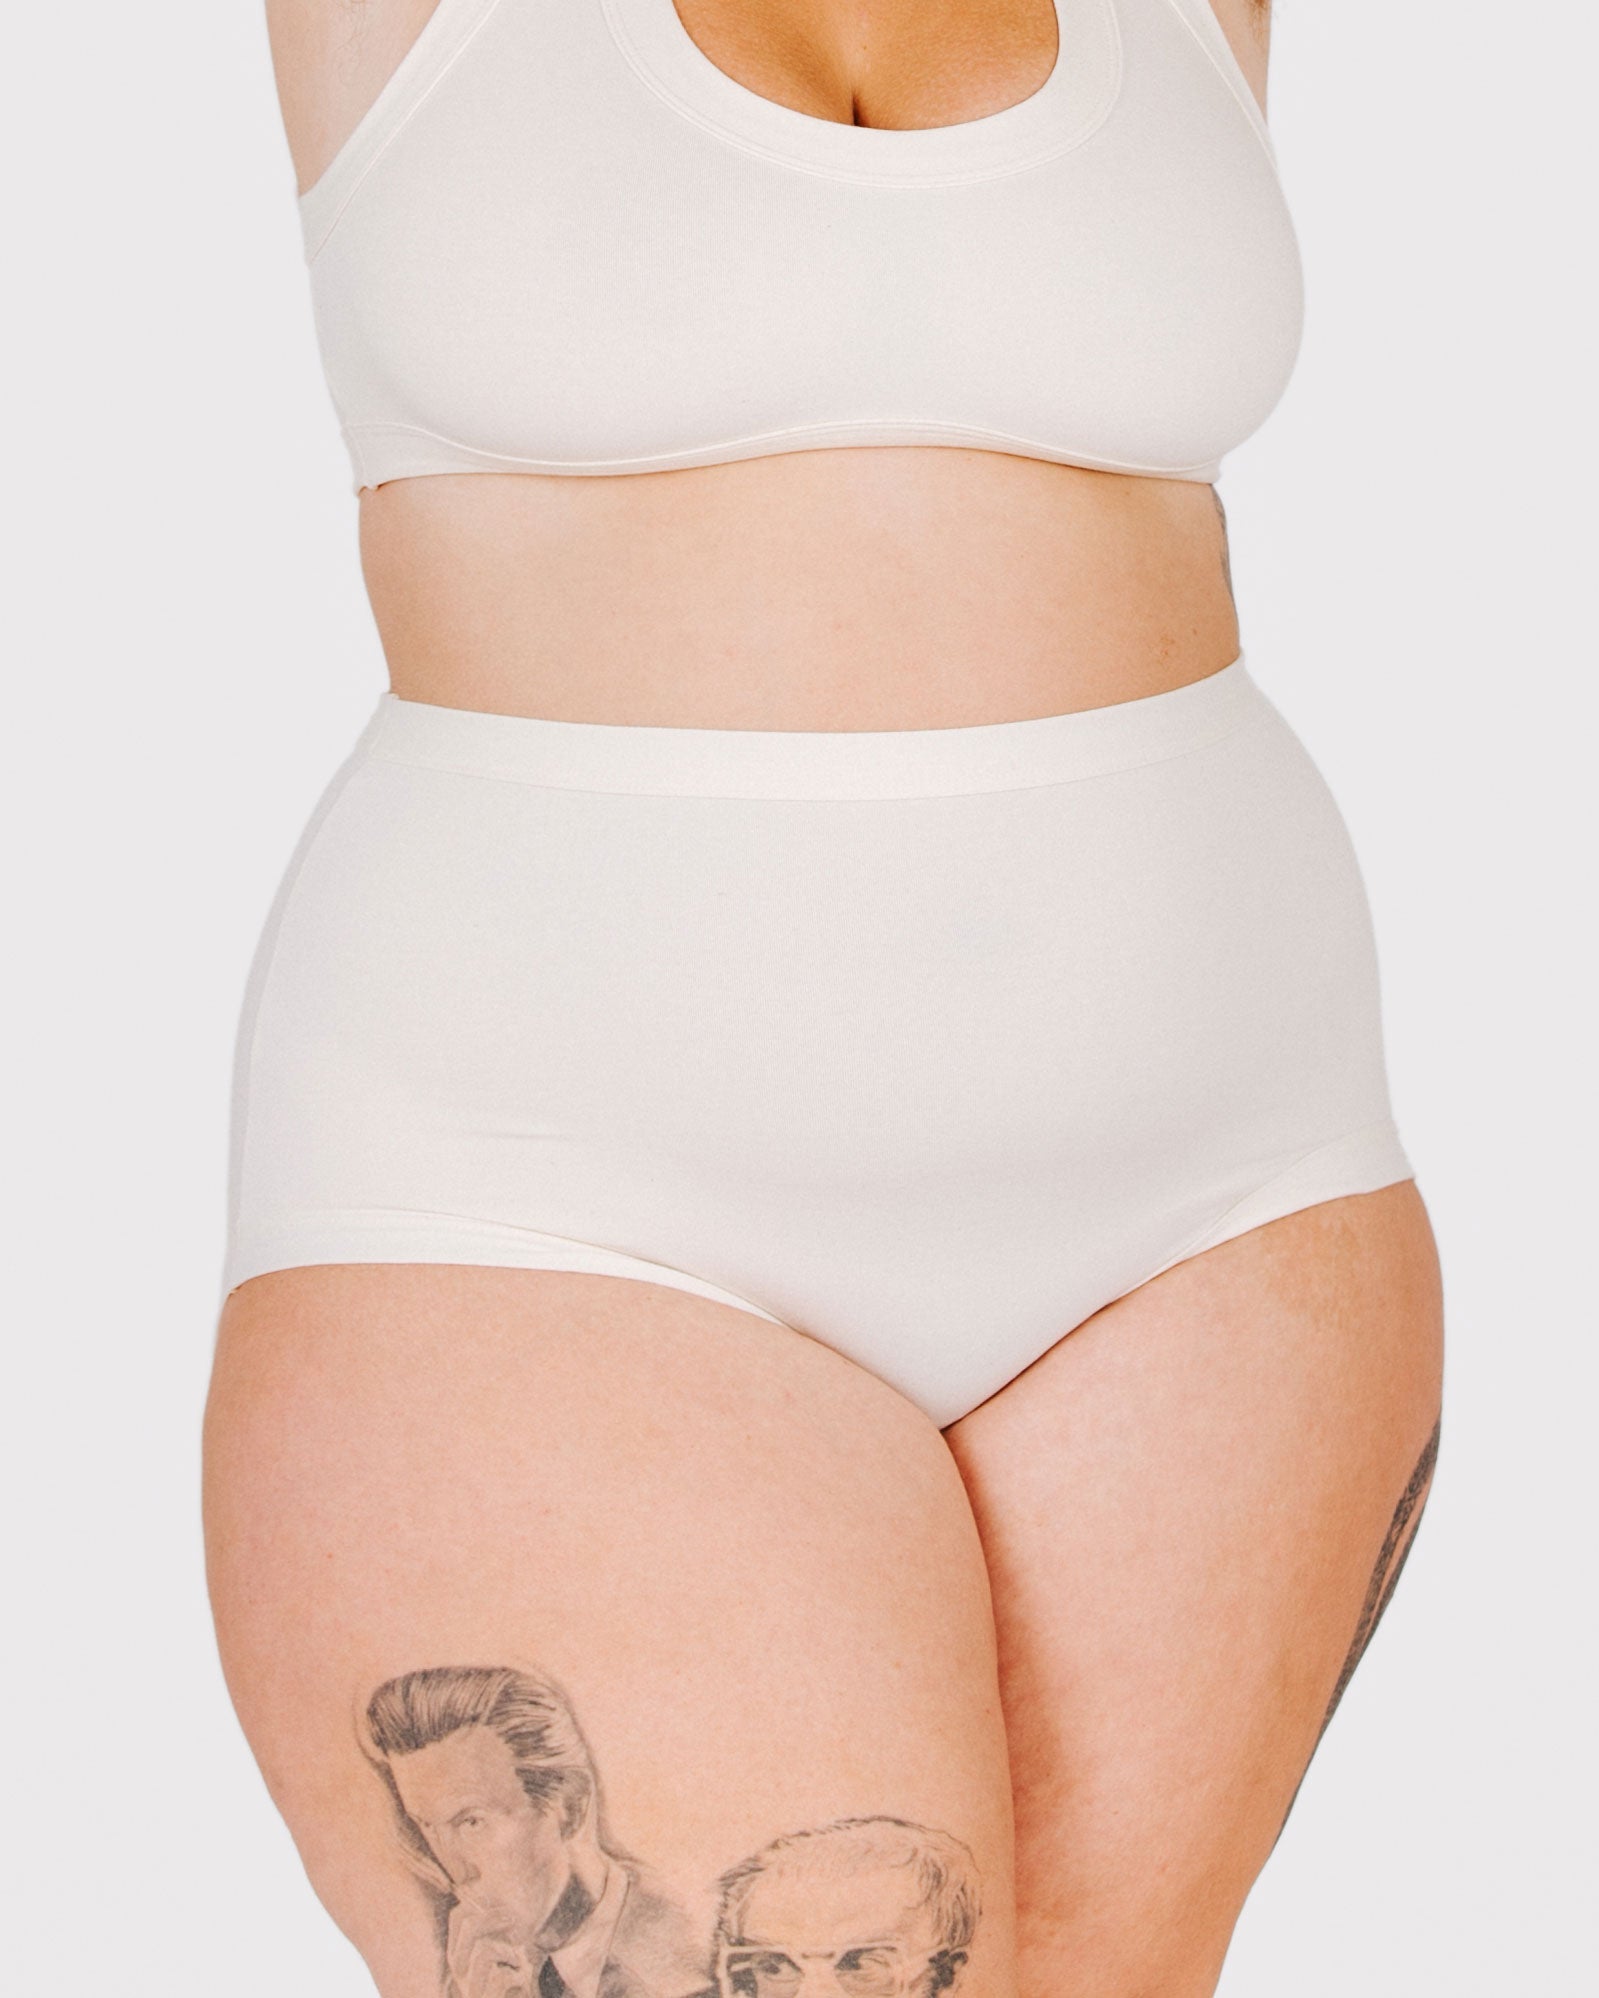 Fit photo from the front of Thunderpants organic cotton Original style underwear in off-white on a model.